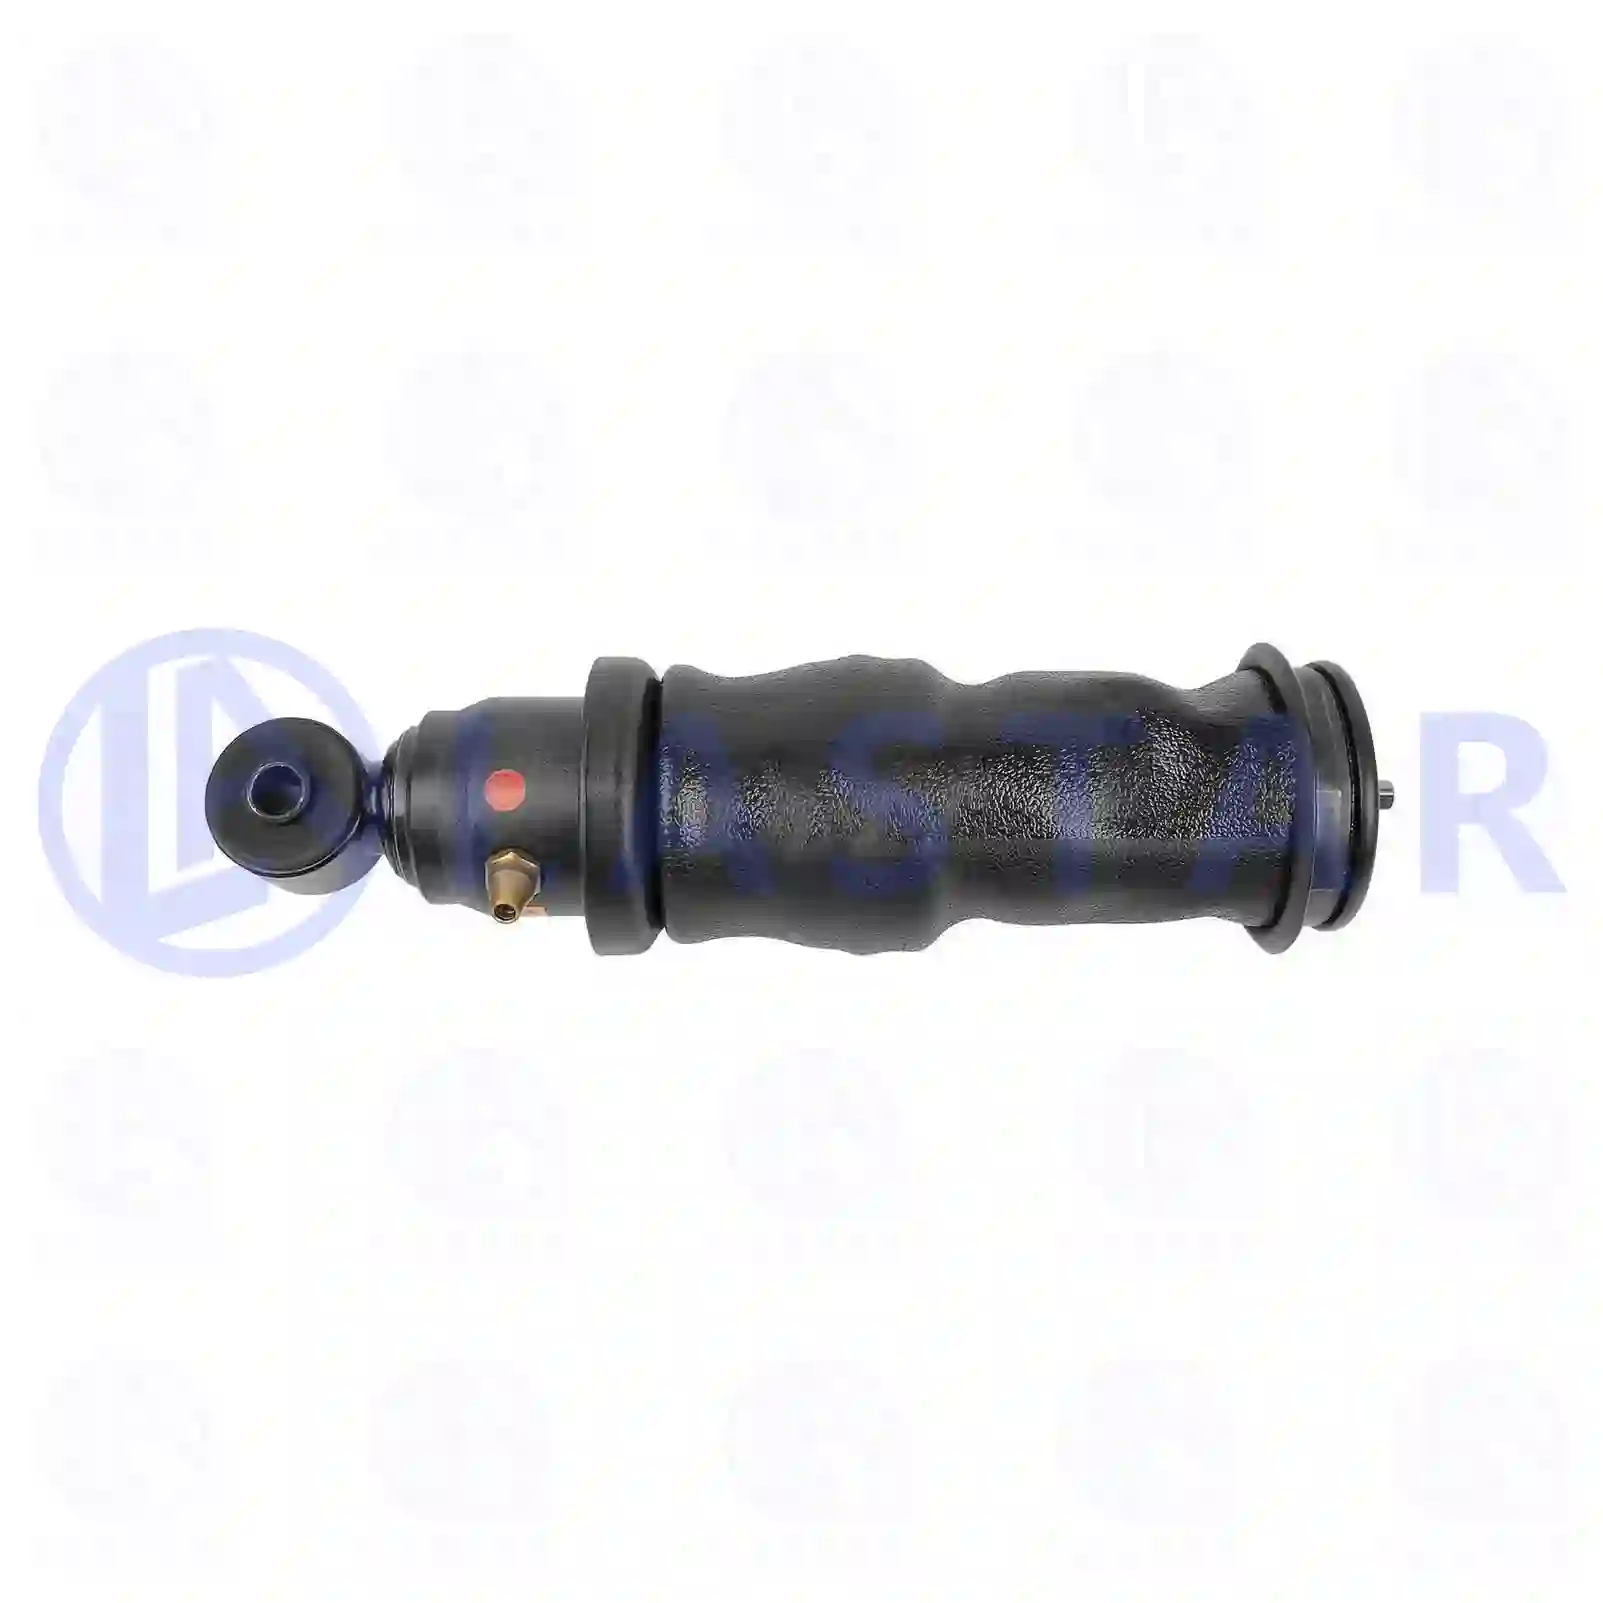 Shock Absorber Cabin shock absorber, with air bellow, la no: 77735945 ,  oem no:1117334, 1331634, 1348118, 1531200011, ZG41206-0008, Lastar Spare Part | Truck Spare Parts, Auotomotive Spare Parts